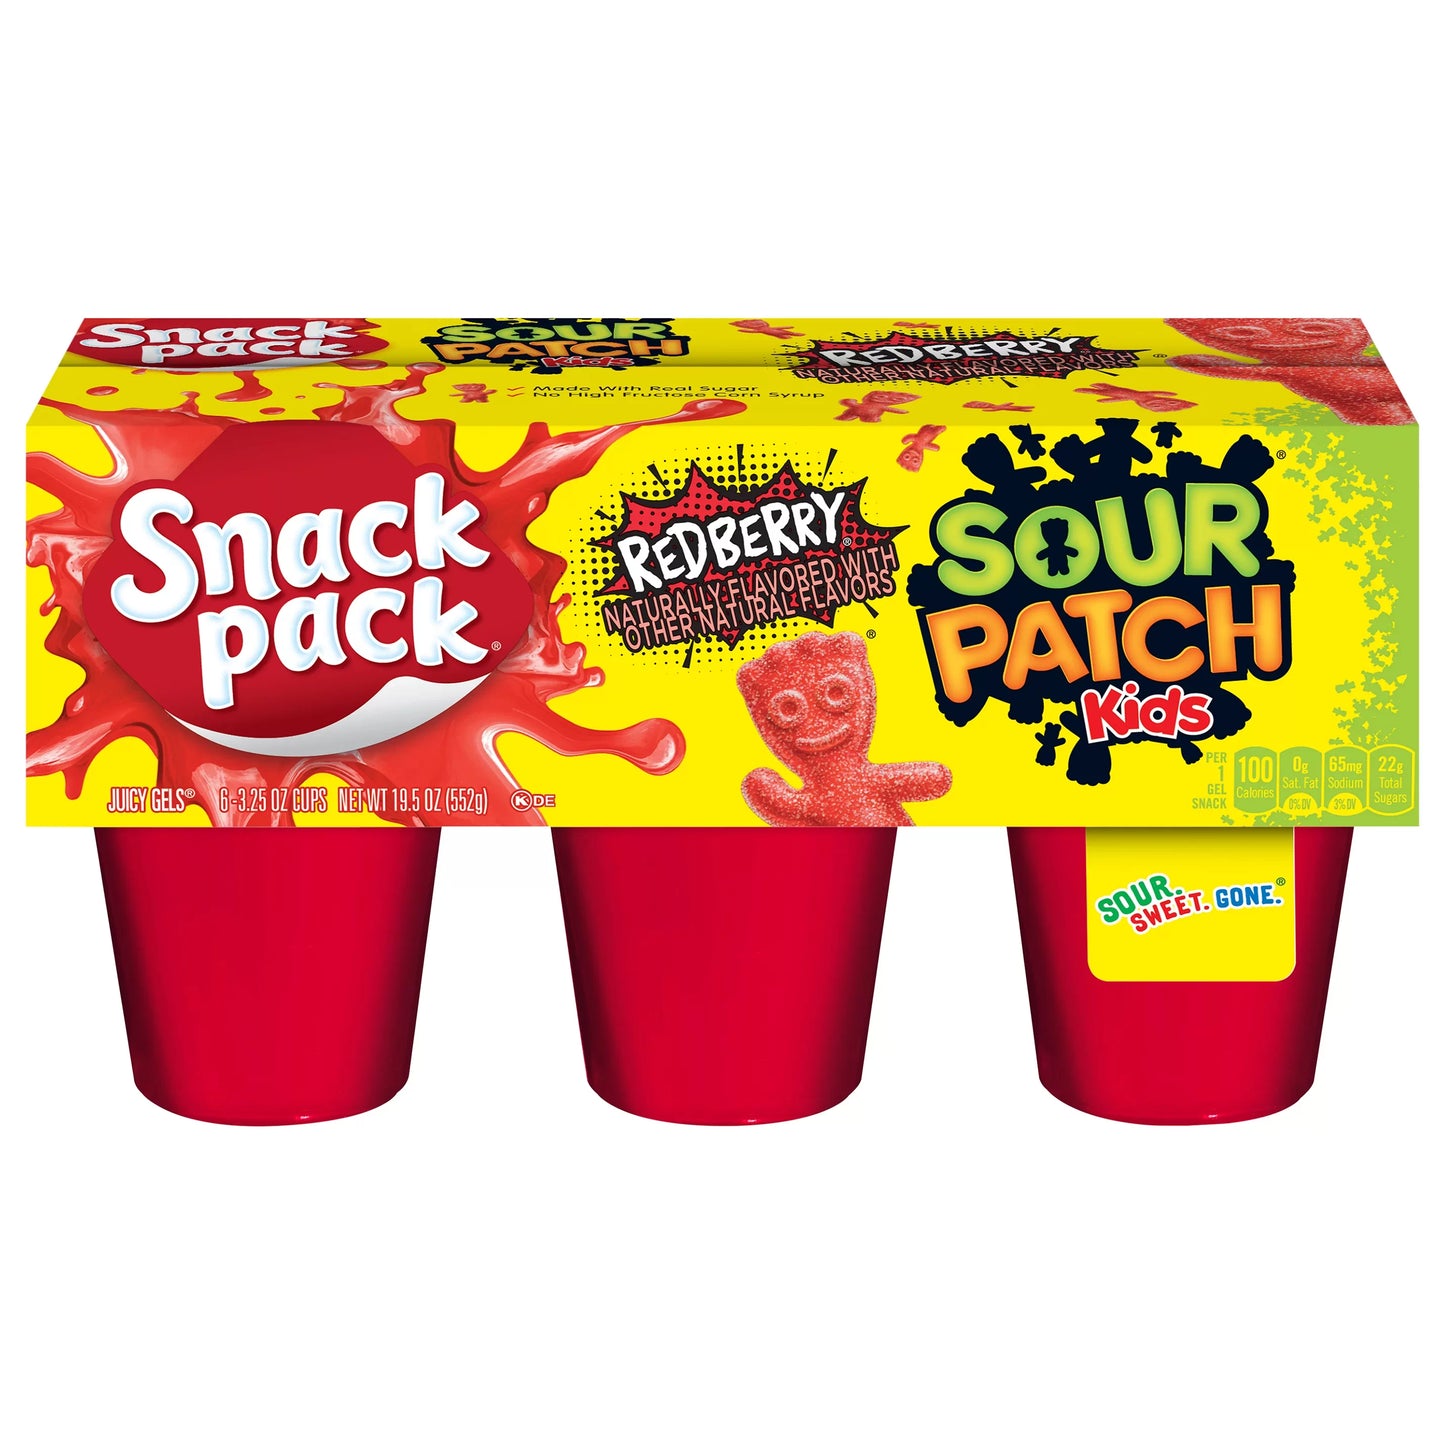 Sour Patch Kids Redberry Juicy Gels Snack Pack 19.5 Oz